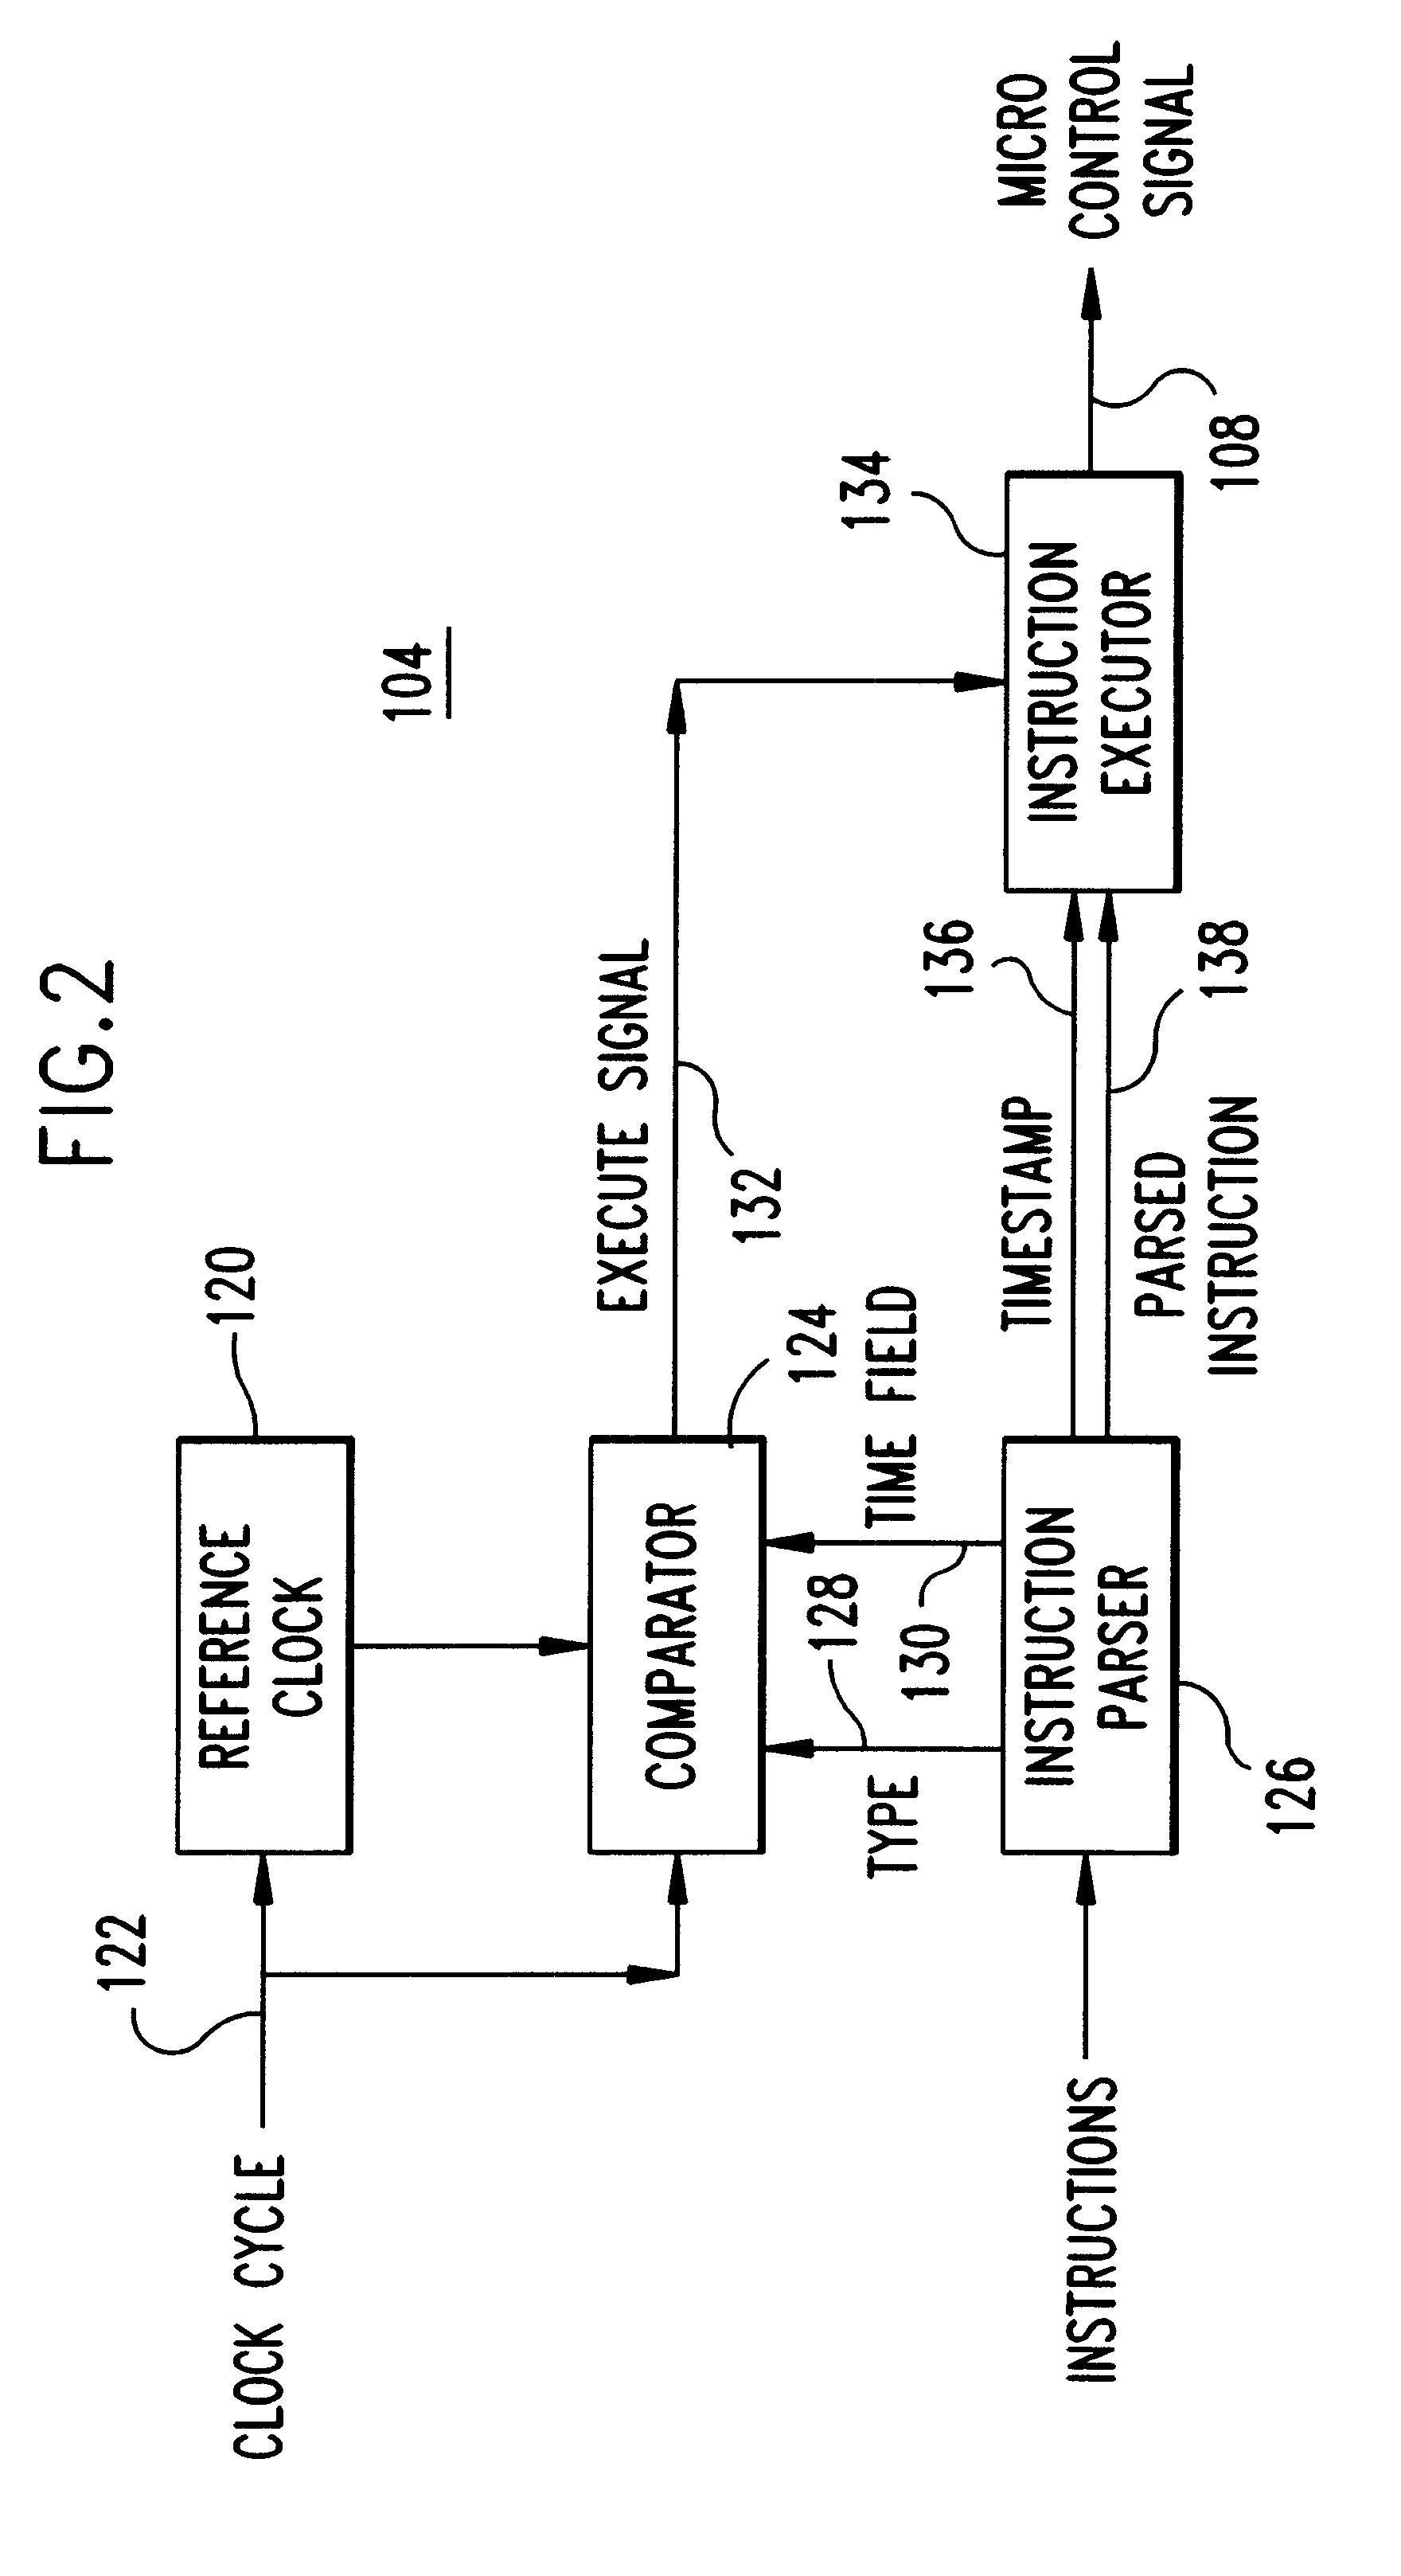 System and method for temporally controlling instruction execution